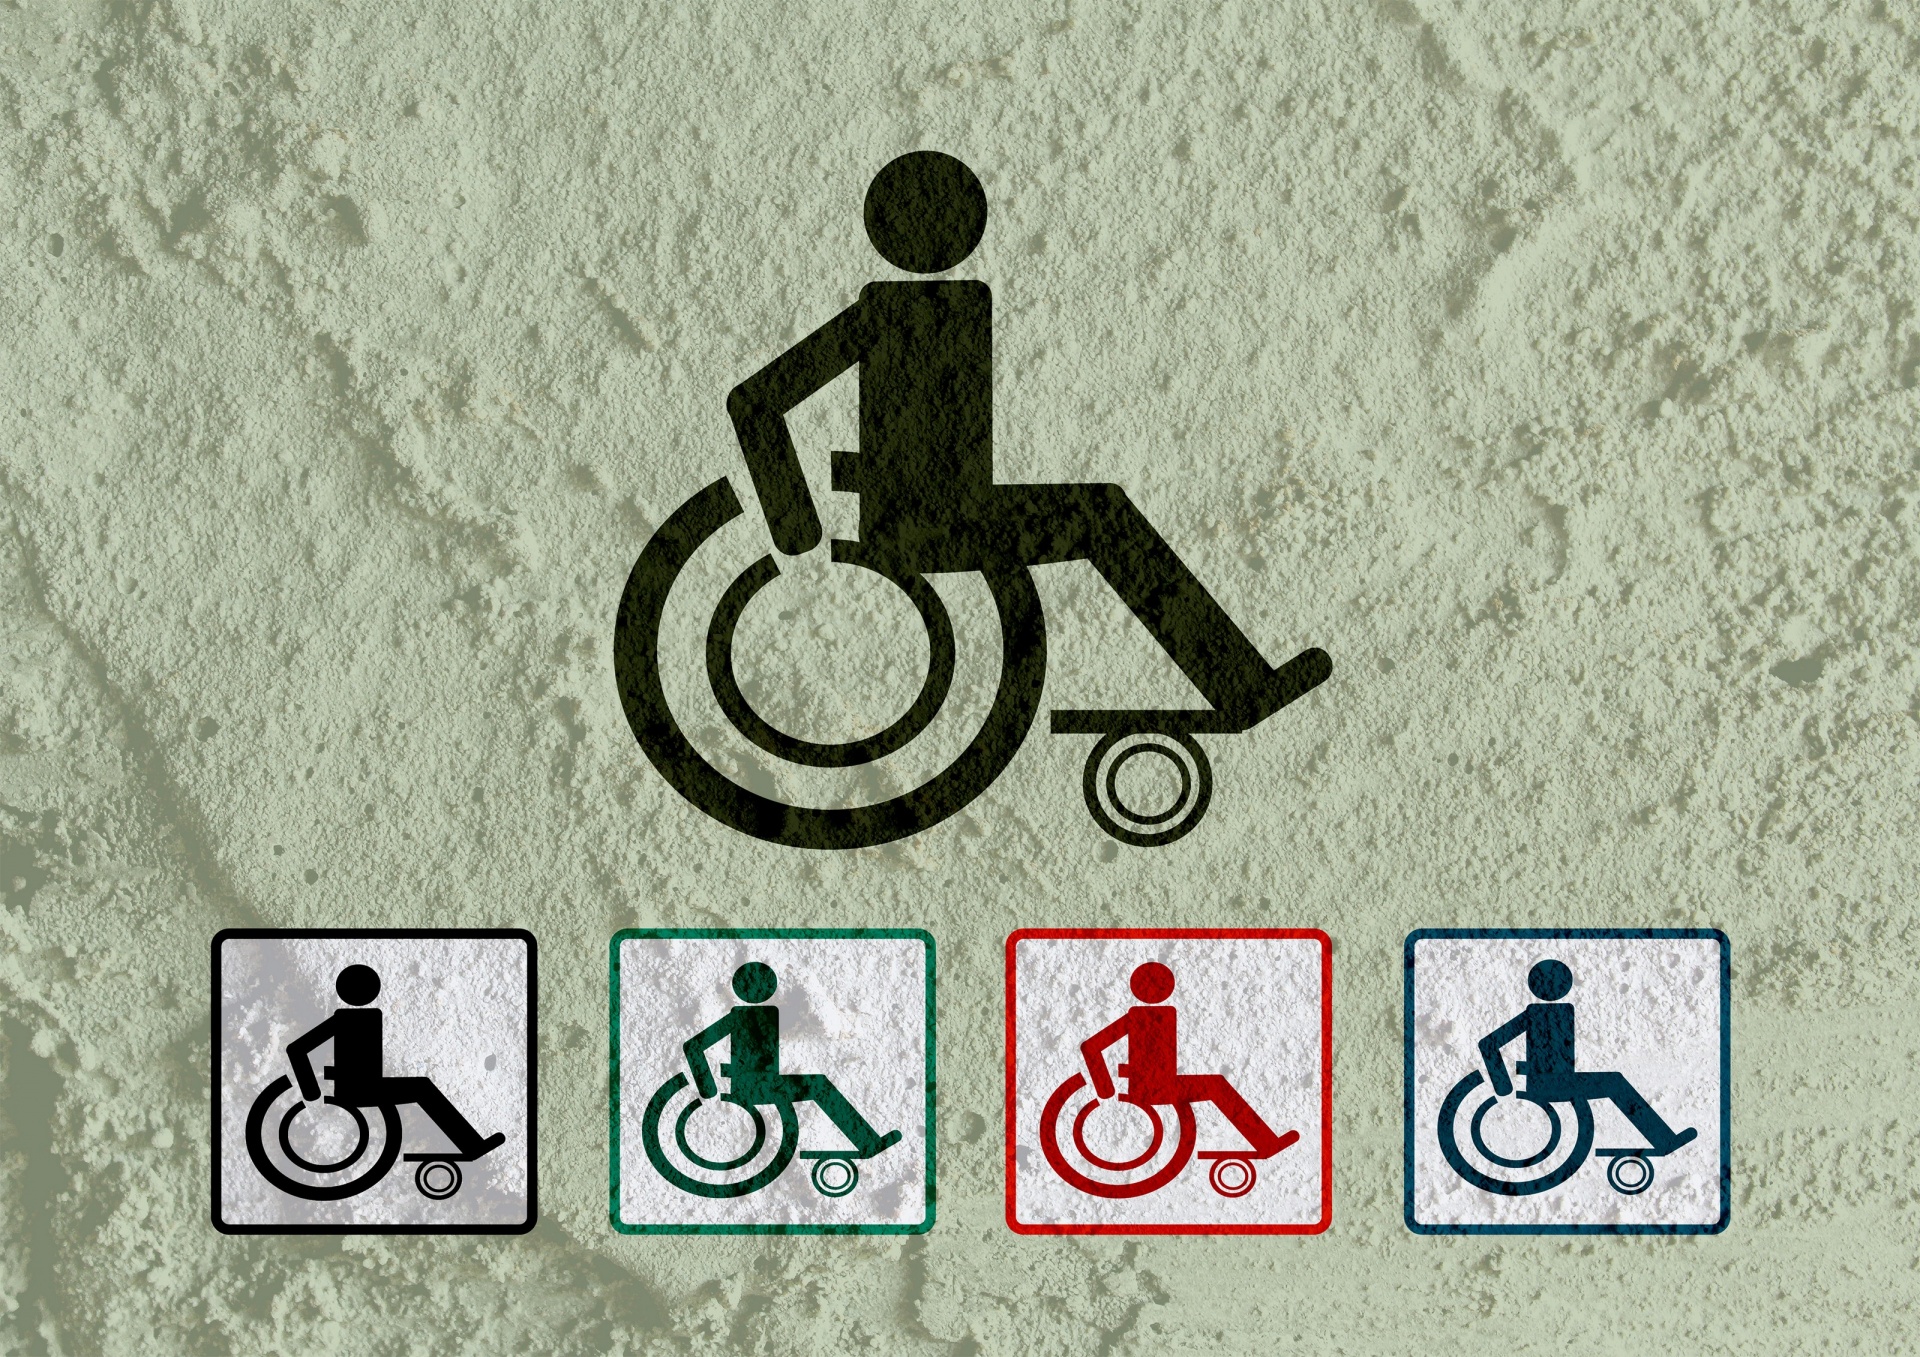 Restrooms for Wheelchair Handicap Icon design and Pictogram icons Sign on Cement wall texture background design